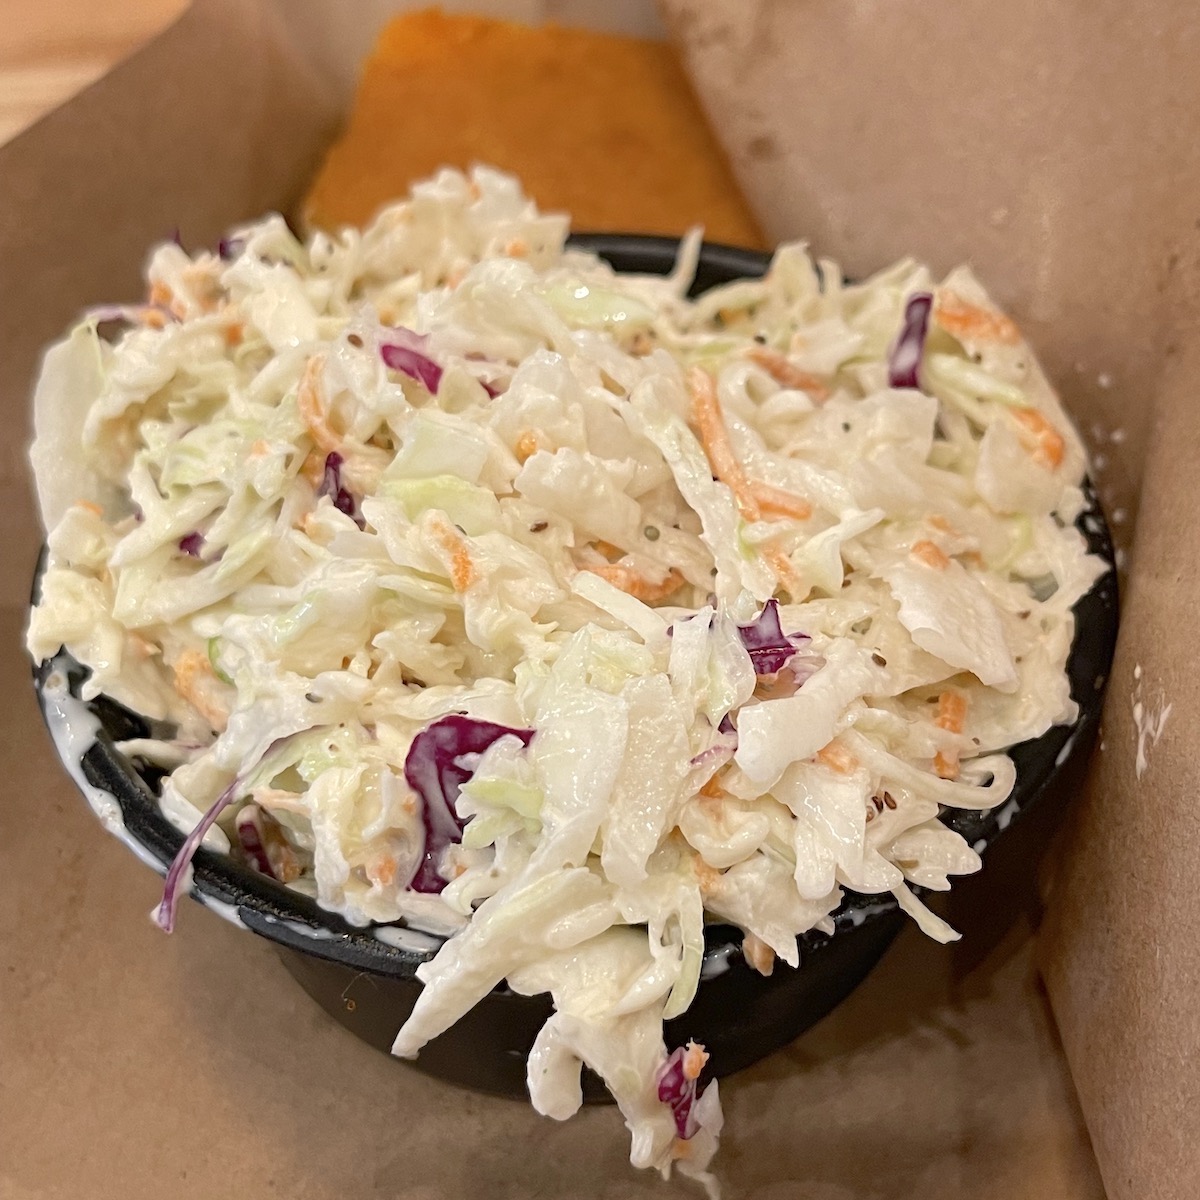 Cole Slaw from Mission BBQ in Doral, Florida